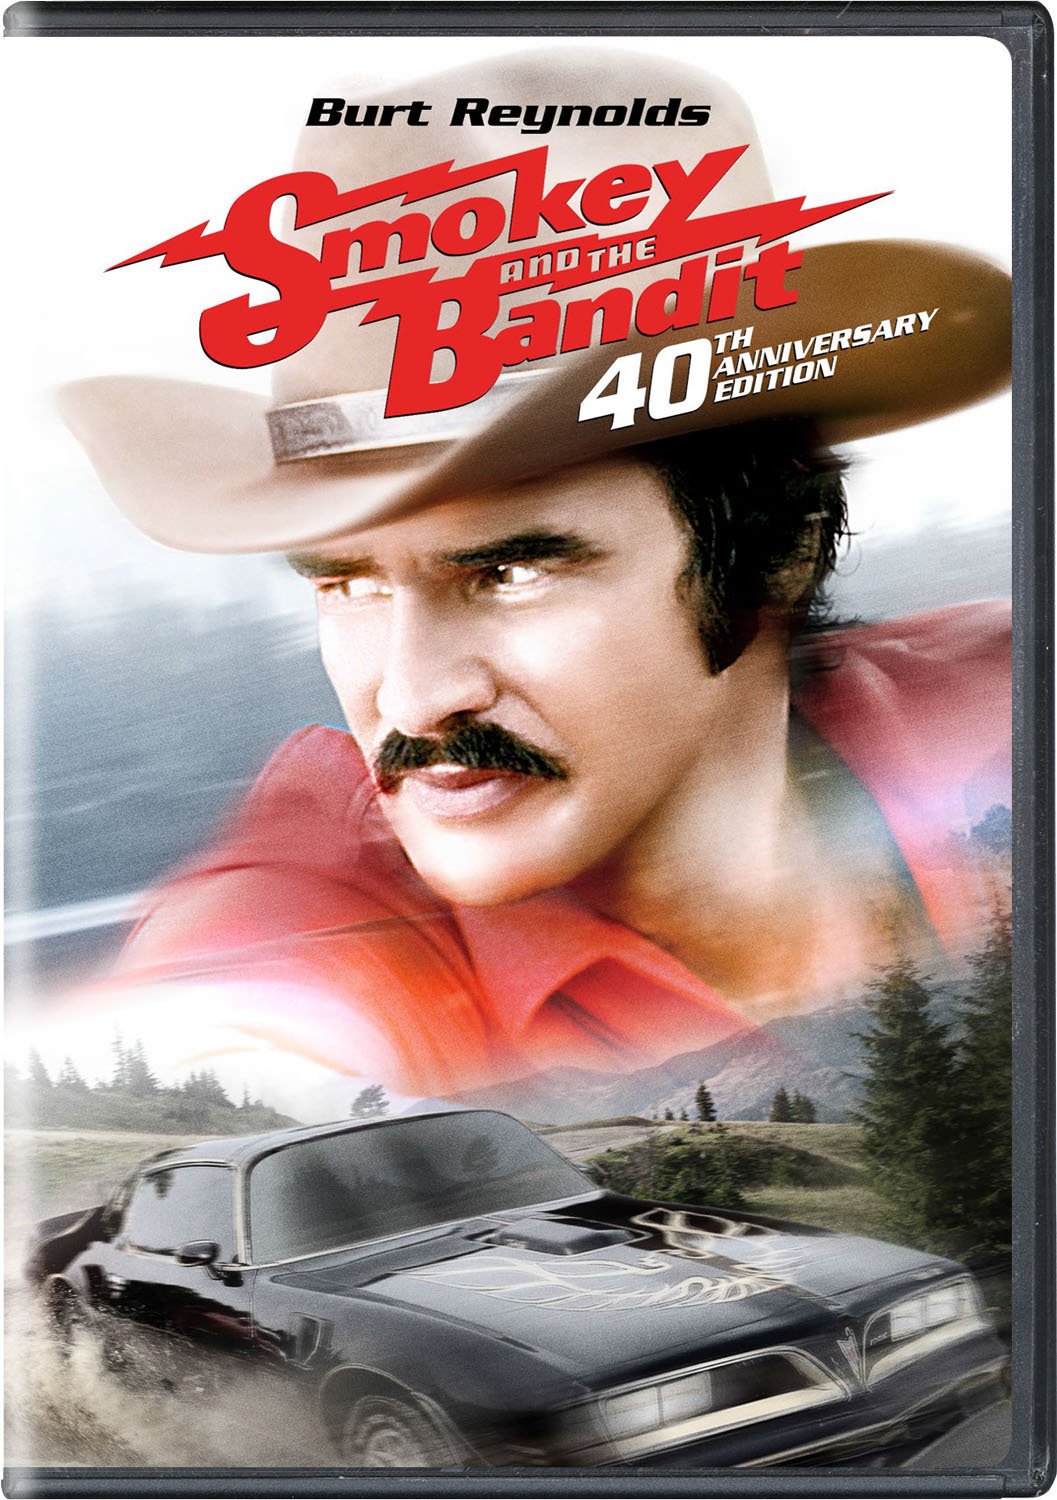 Smokey and the Bandit stars Burt Reynolds and Jackie Gleason in an outrageous comedy